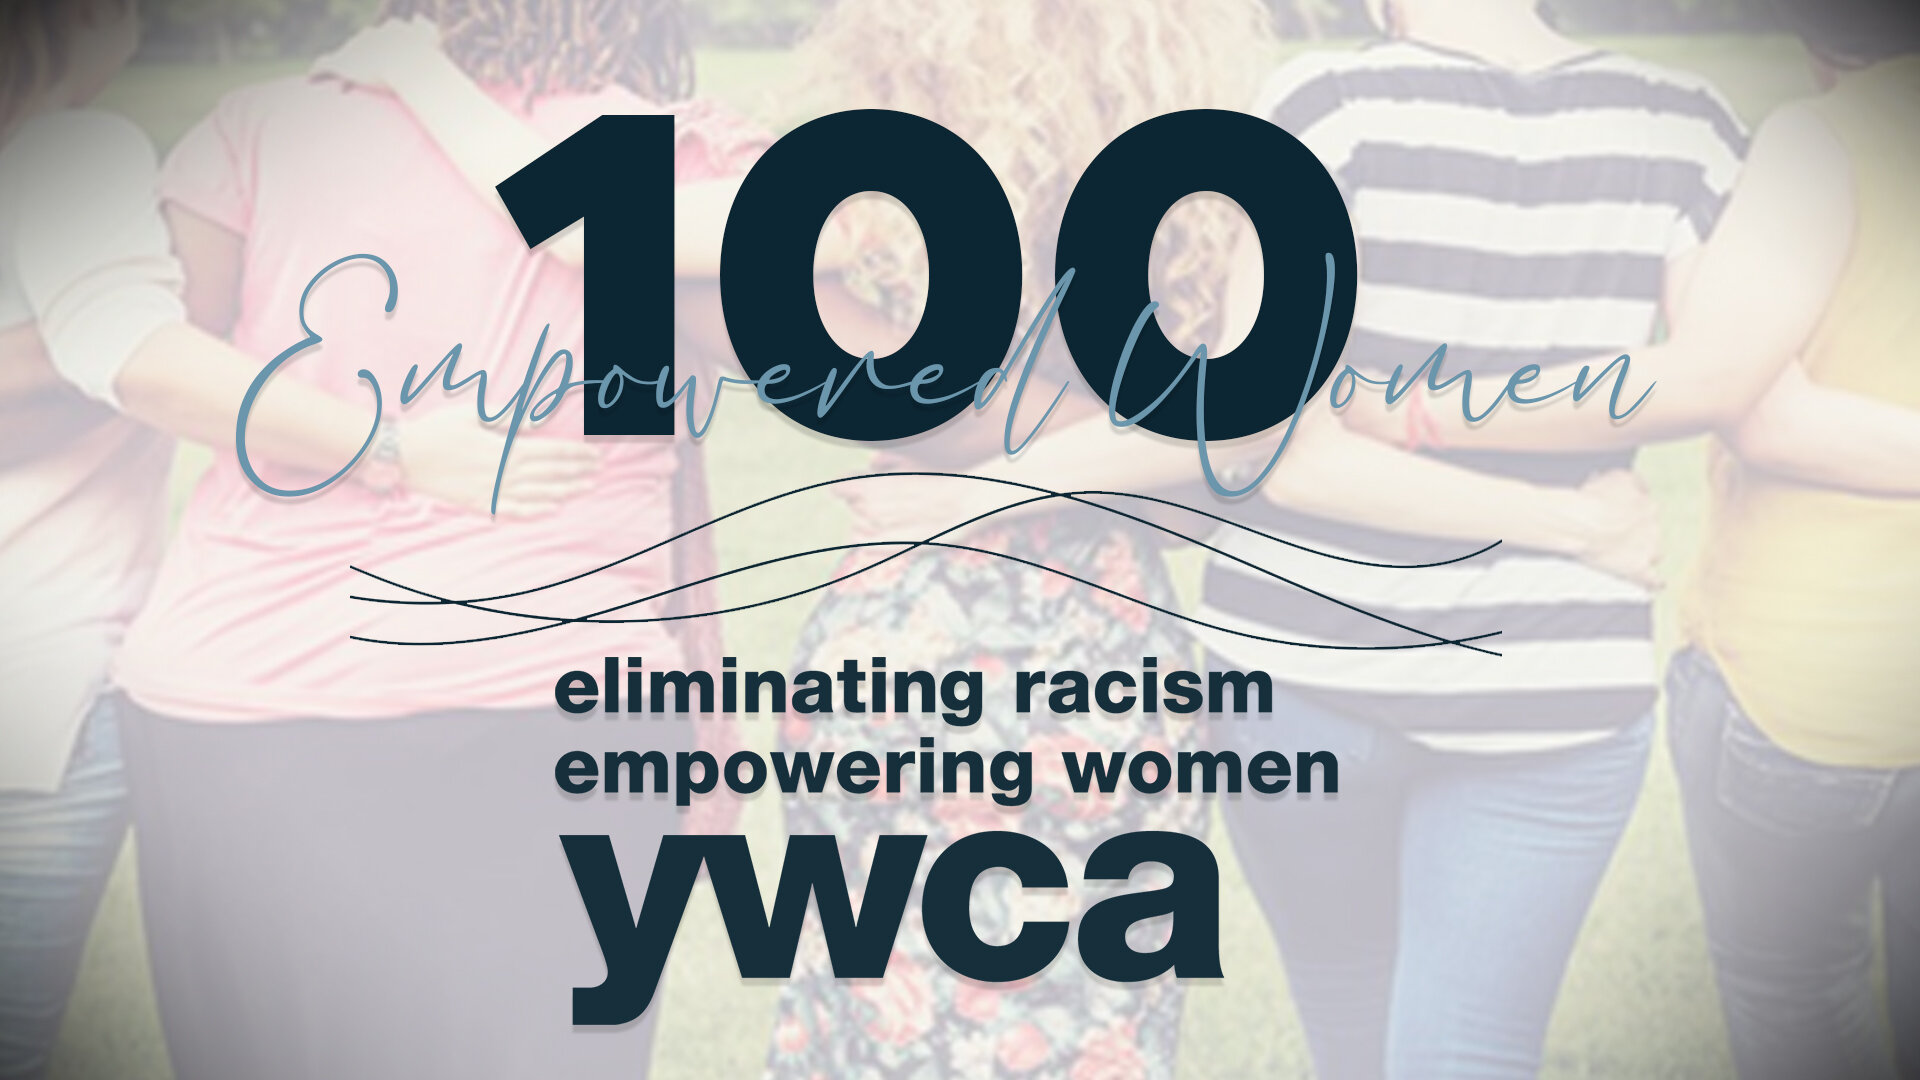 Will you become an Empowered Woman?
 
YWCA Rock County has launched a new campaign called 100 Empowered Women (formerly known as the 100 Caring Women Campaign) with the goal of raising the first $100,000 or more towards YWCA Rock County's Strengtheni